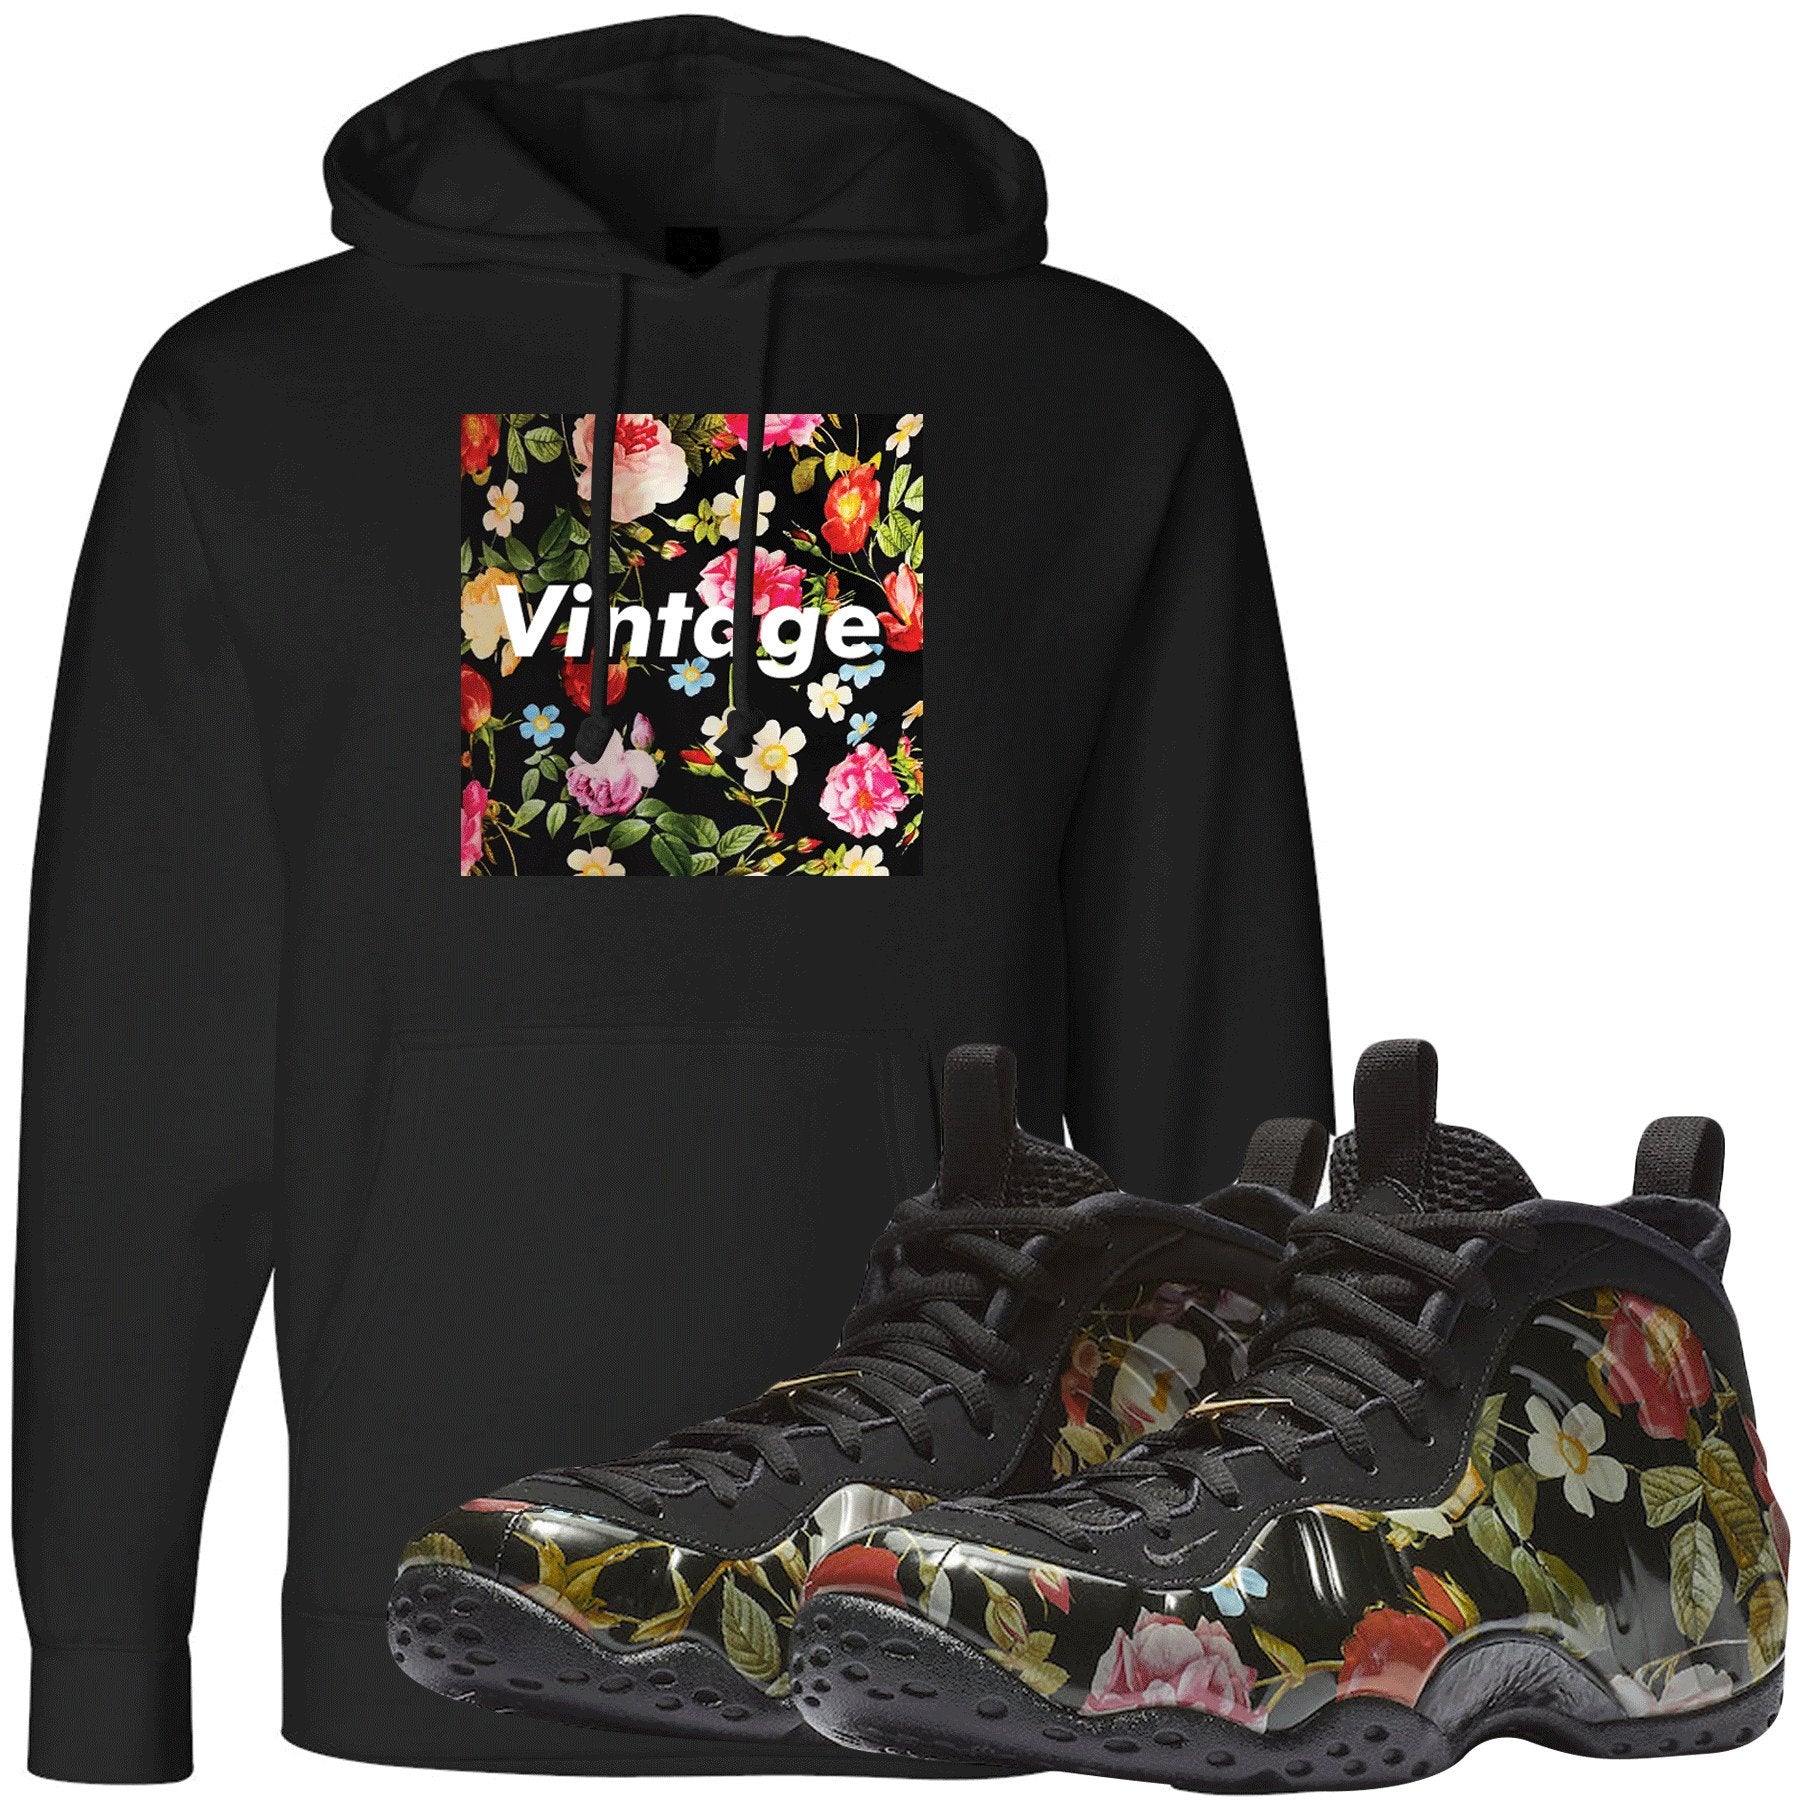 Wear this sneaker matching hoodie to match your Air Foamposite One Floral sneakers. Match your floral foams today!